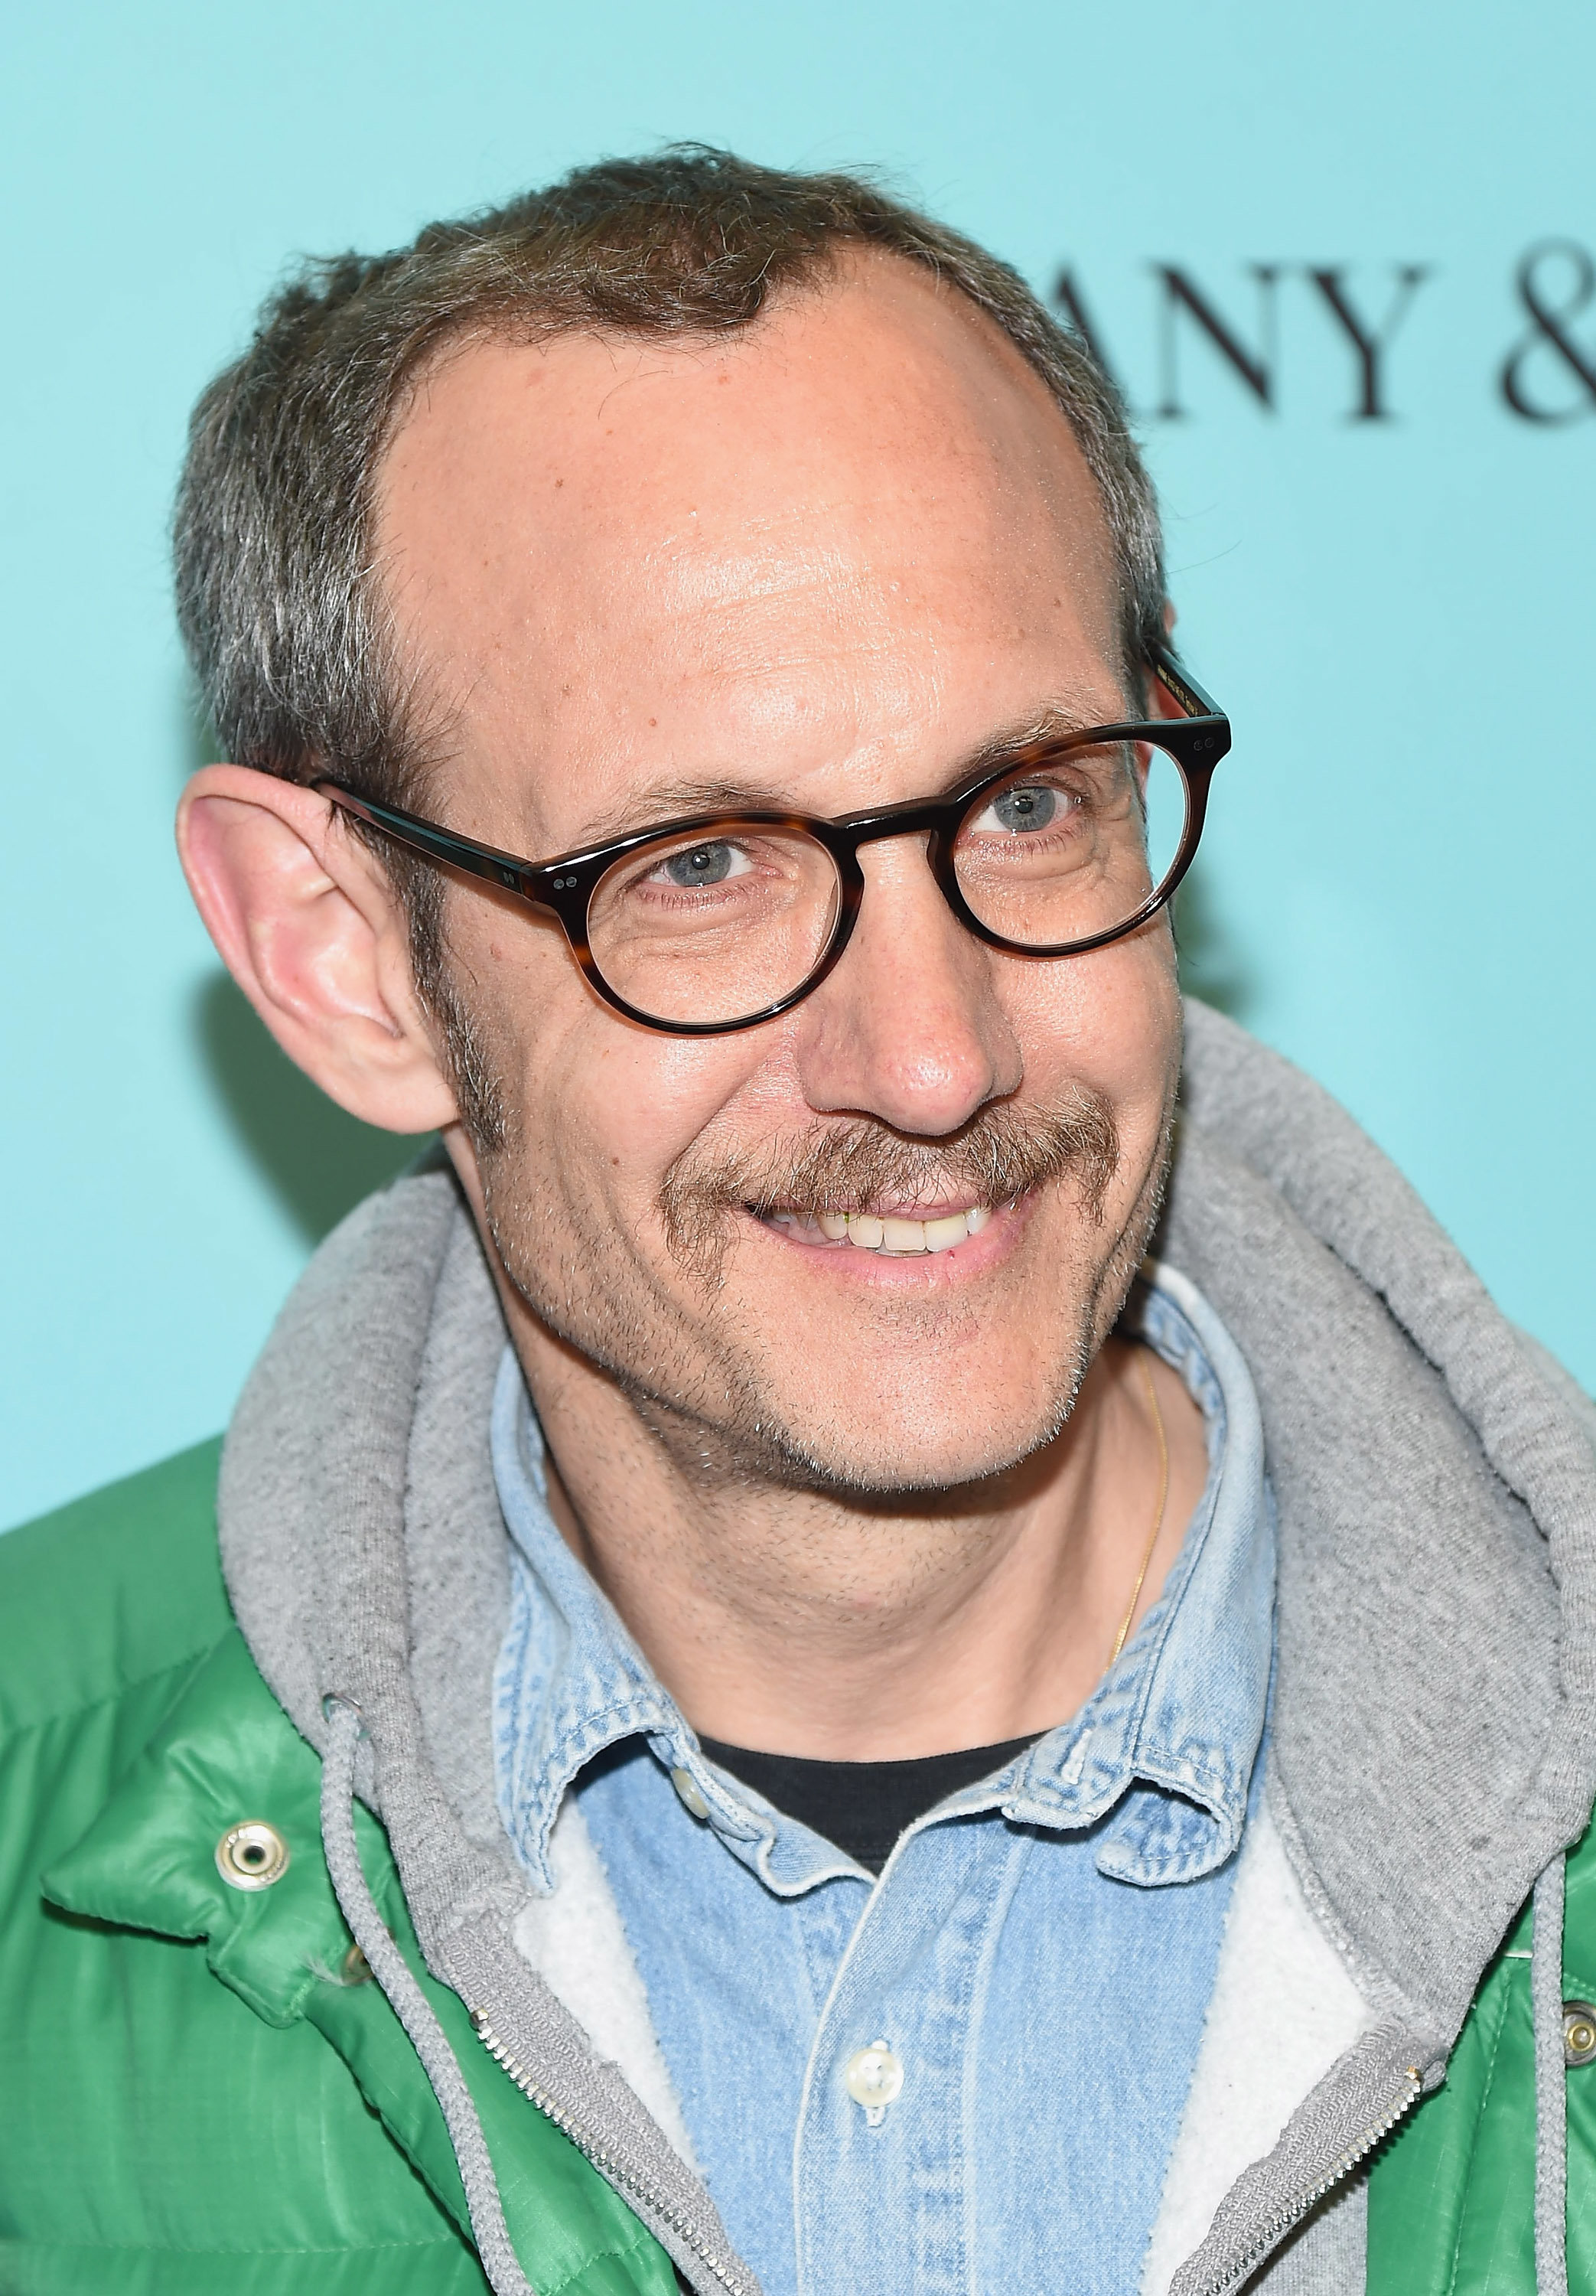 Terry Richardson attends Harper's Bazaar 150th Anniversary Party at The Rainbow Room on 19 April 2017 in New York City